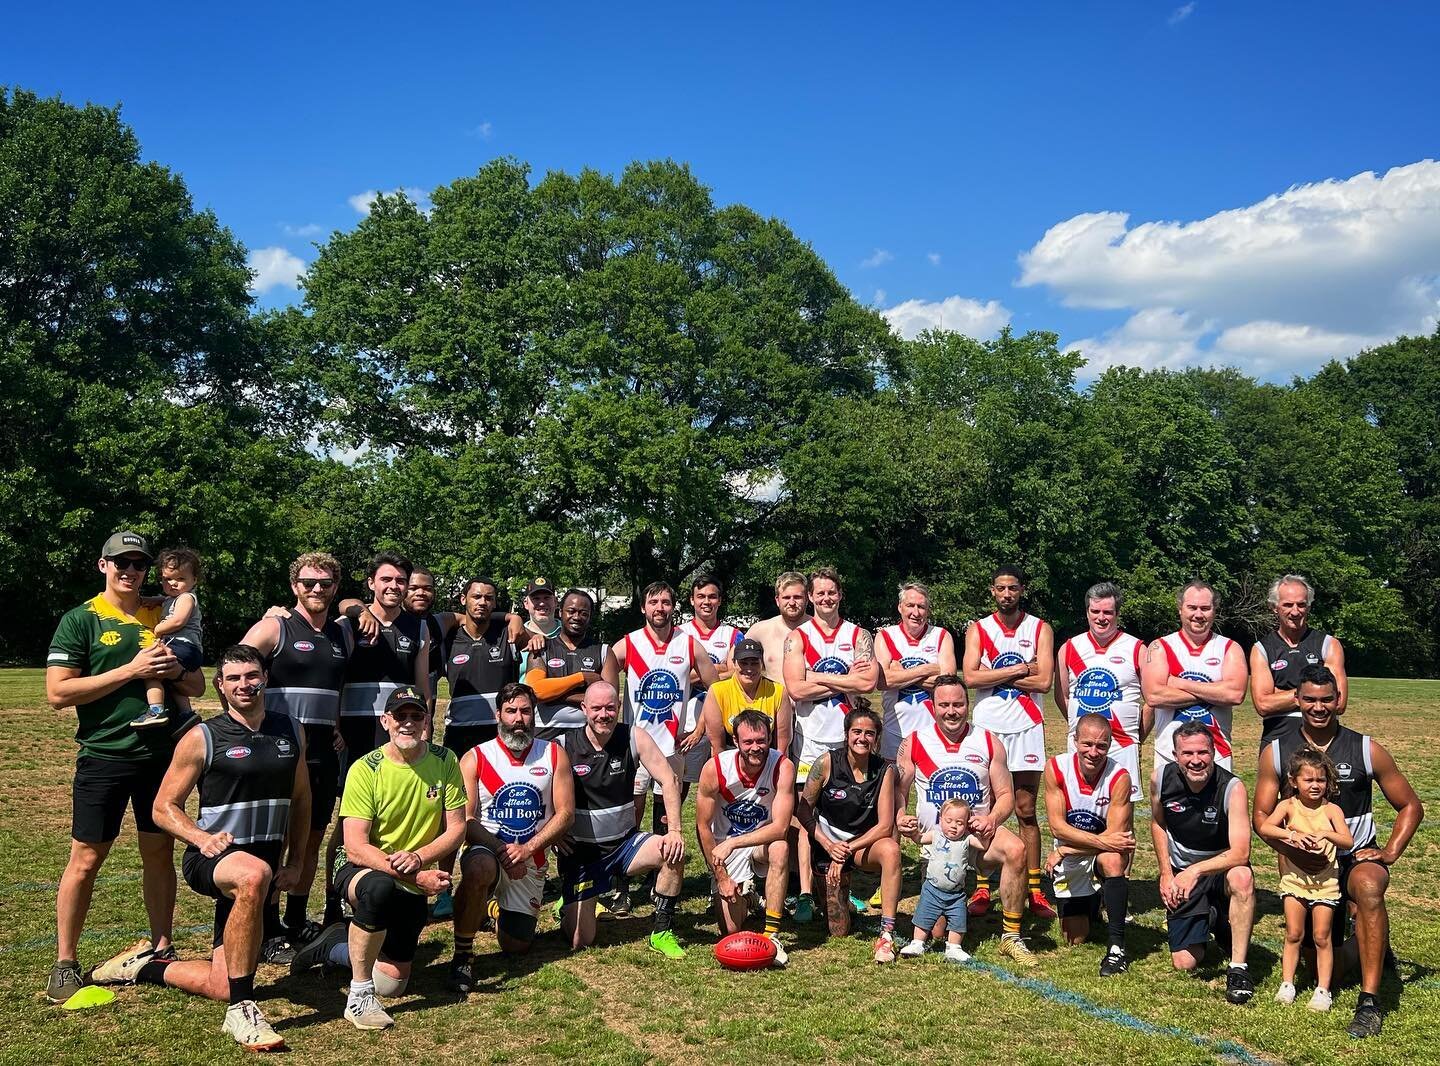 The Kooka&rsquo;s NGAFL team &ldquo;East Atlanta Tall Boys&rdquo; had a hard fought game versus a combined Grovetown, Chatanooga, Rome, Birmingham, and North Carolina. Footy in the south is alive! #usafl #aussierules